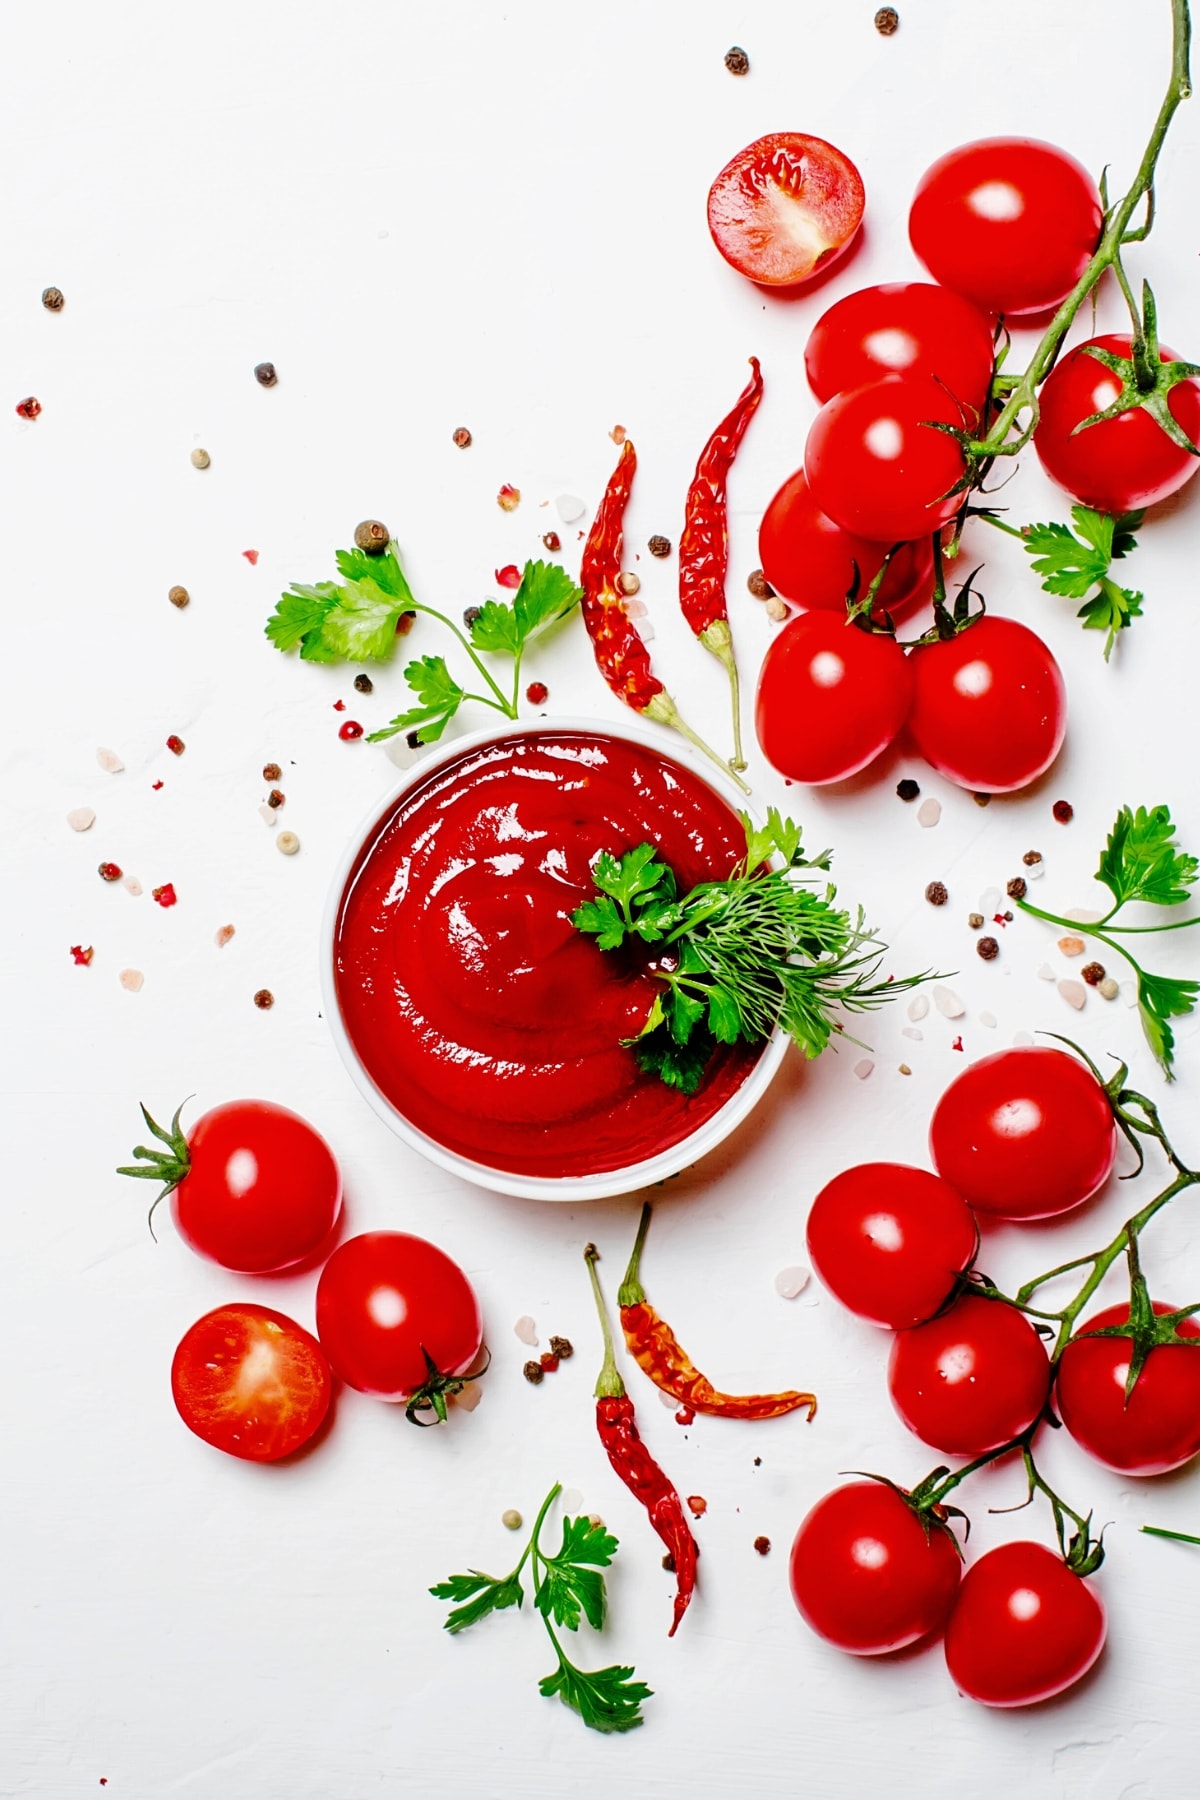 Homemade Ketchup with Chili Peppers on a White Background